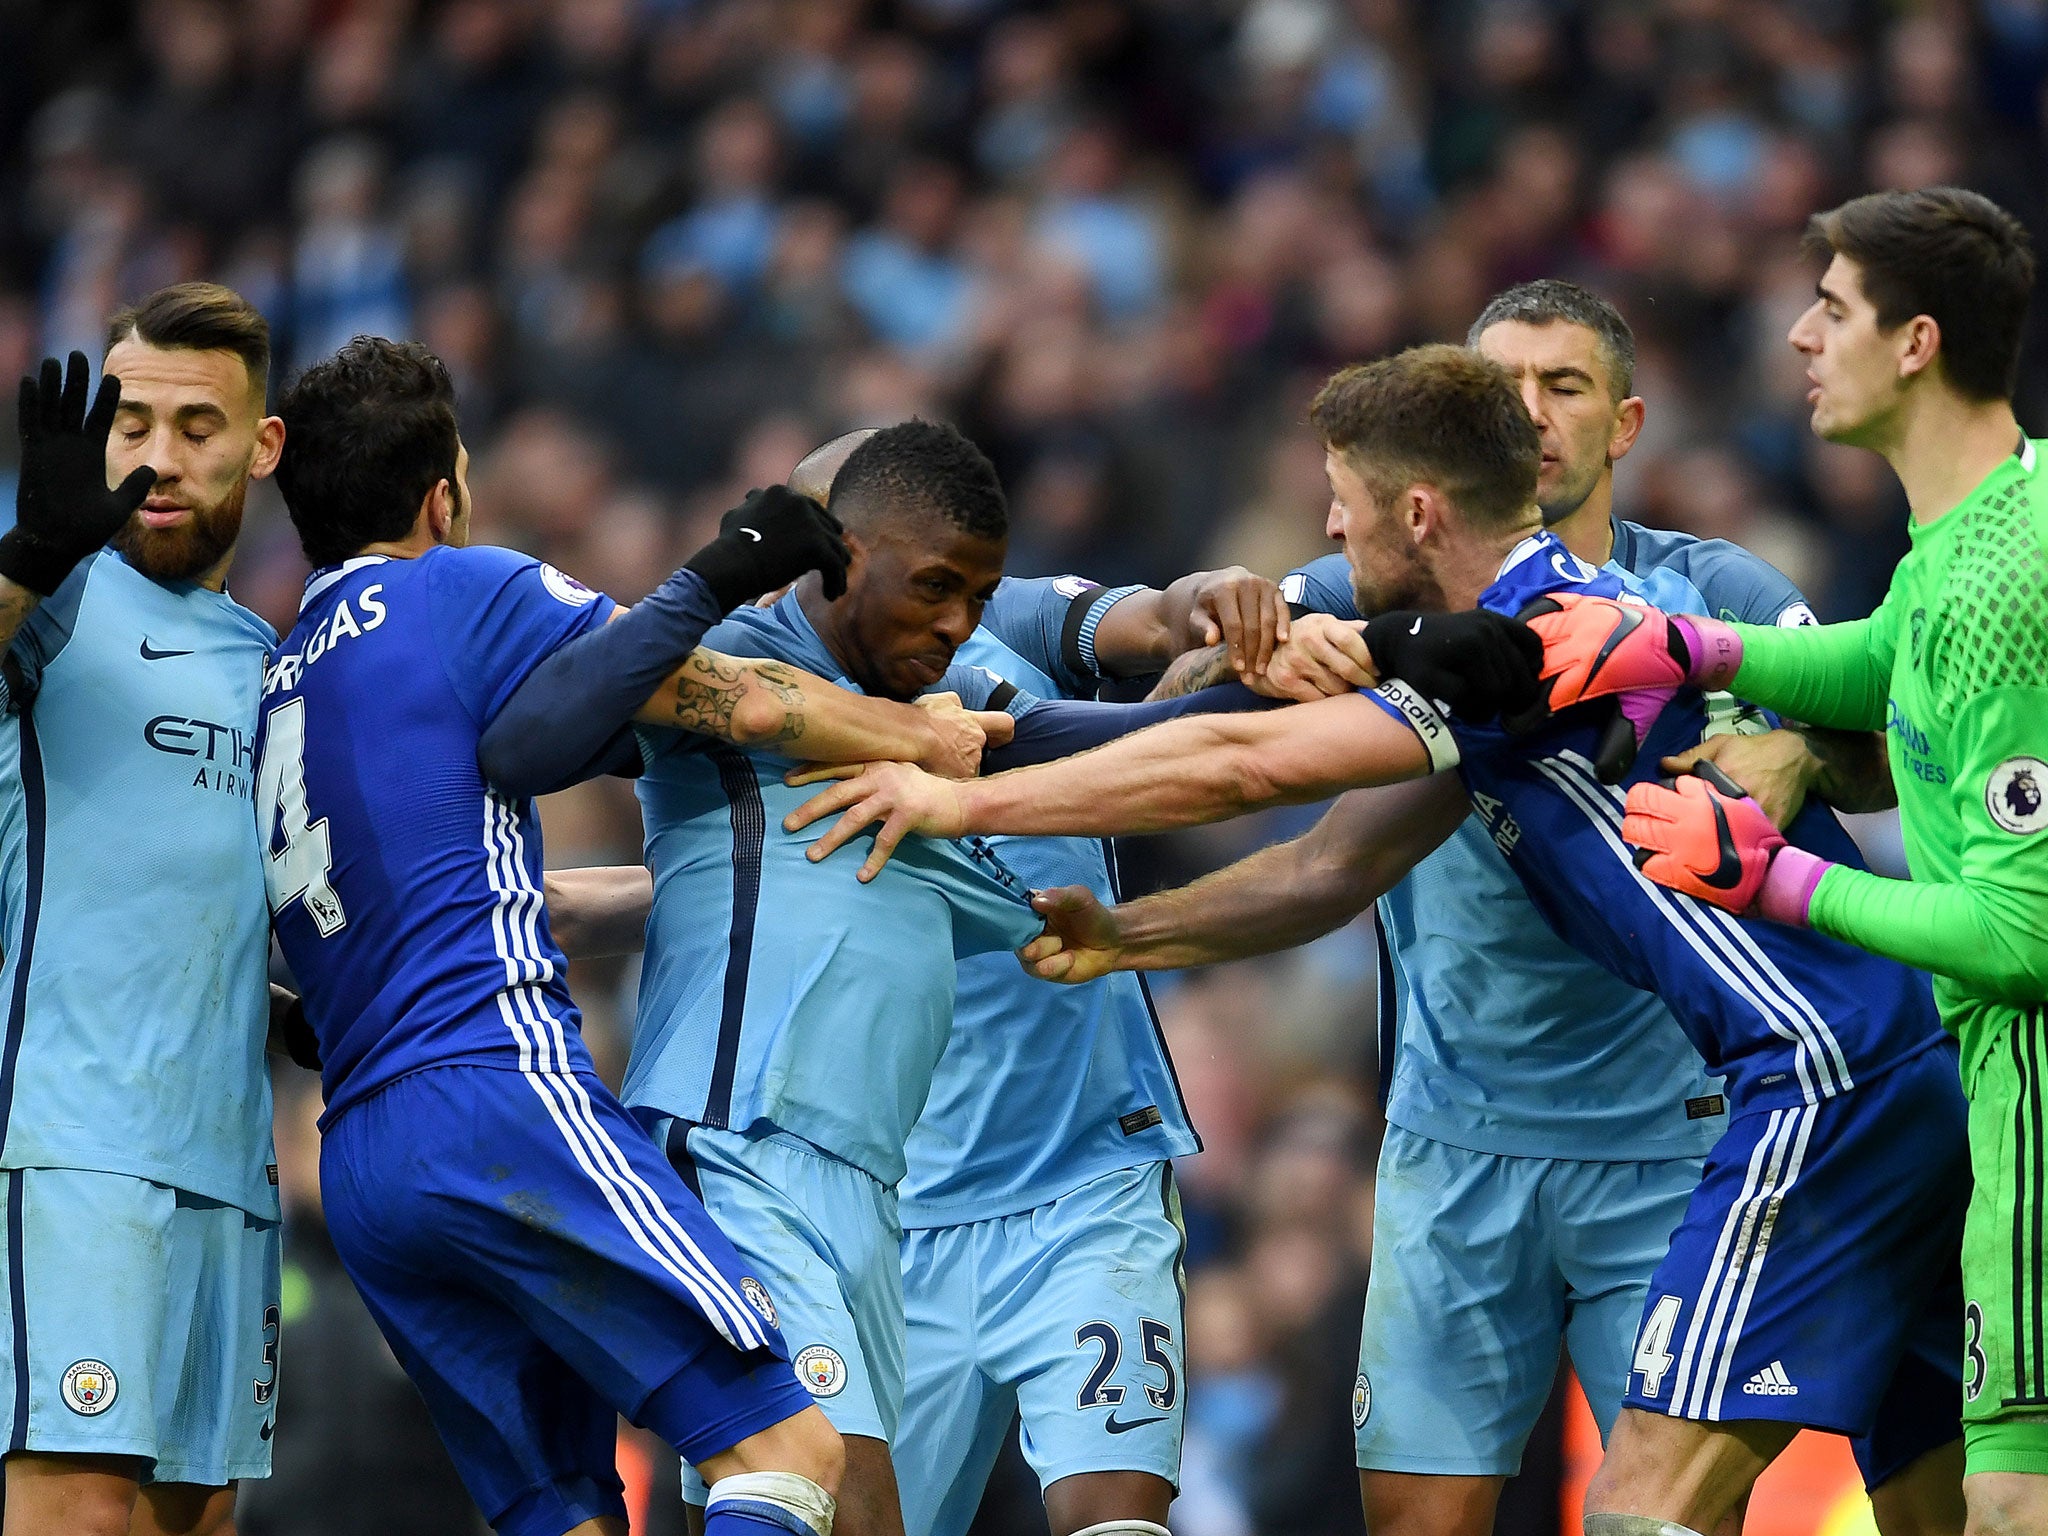 Manchester City and Chelsea players brawl during their encounter at the Etihad Stadium on December 3